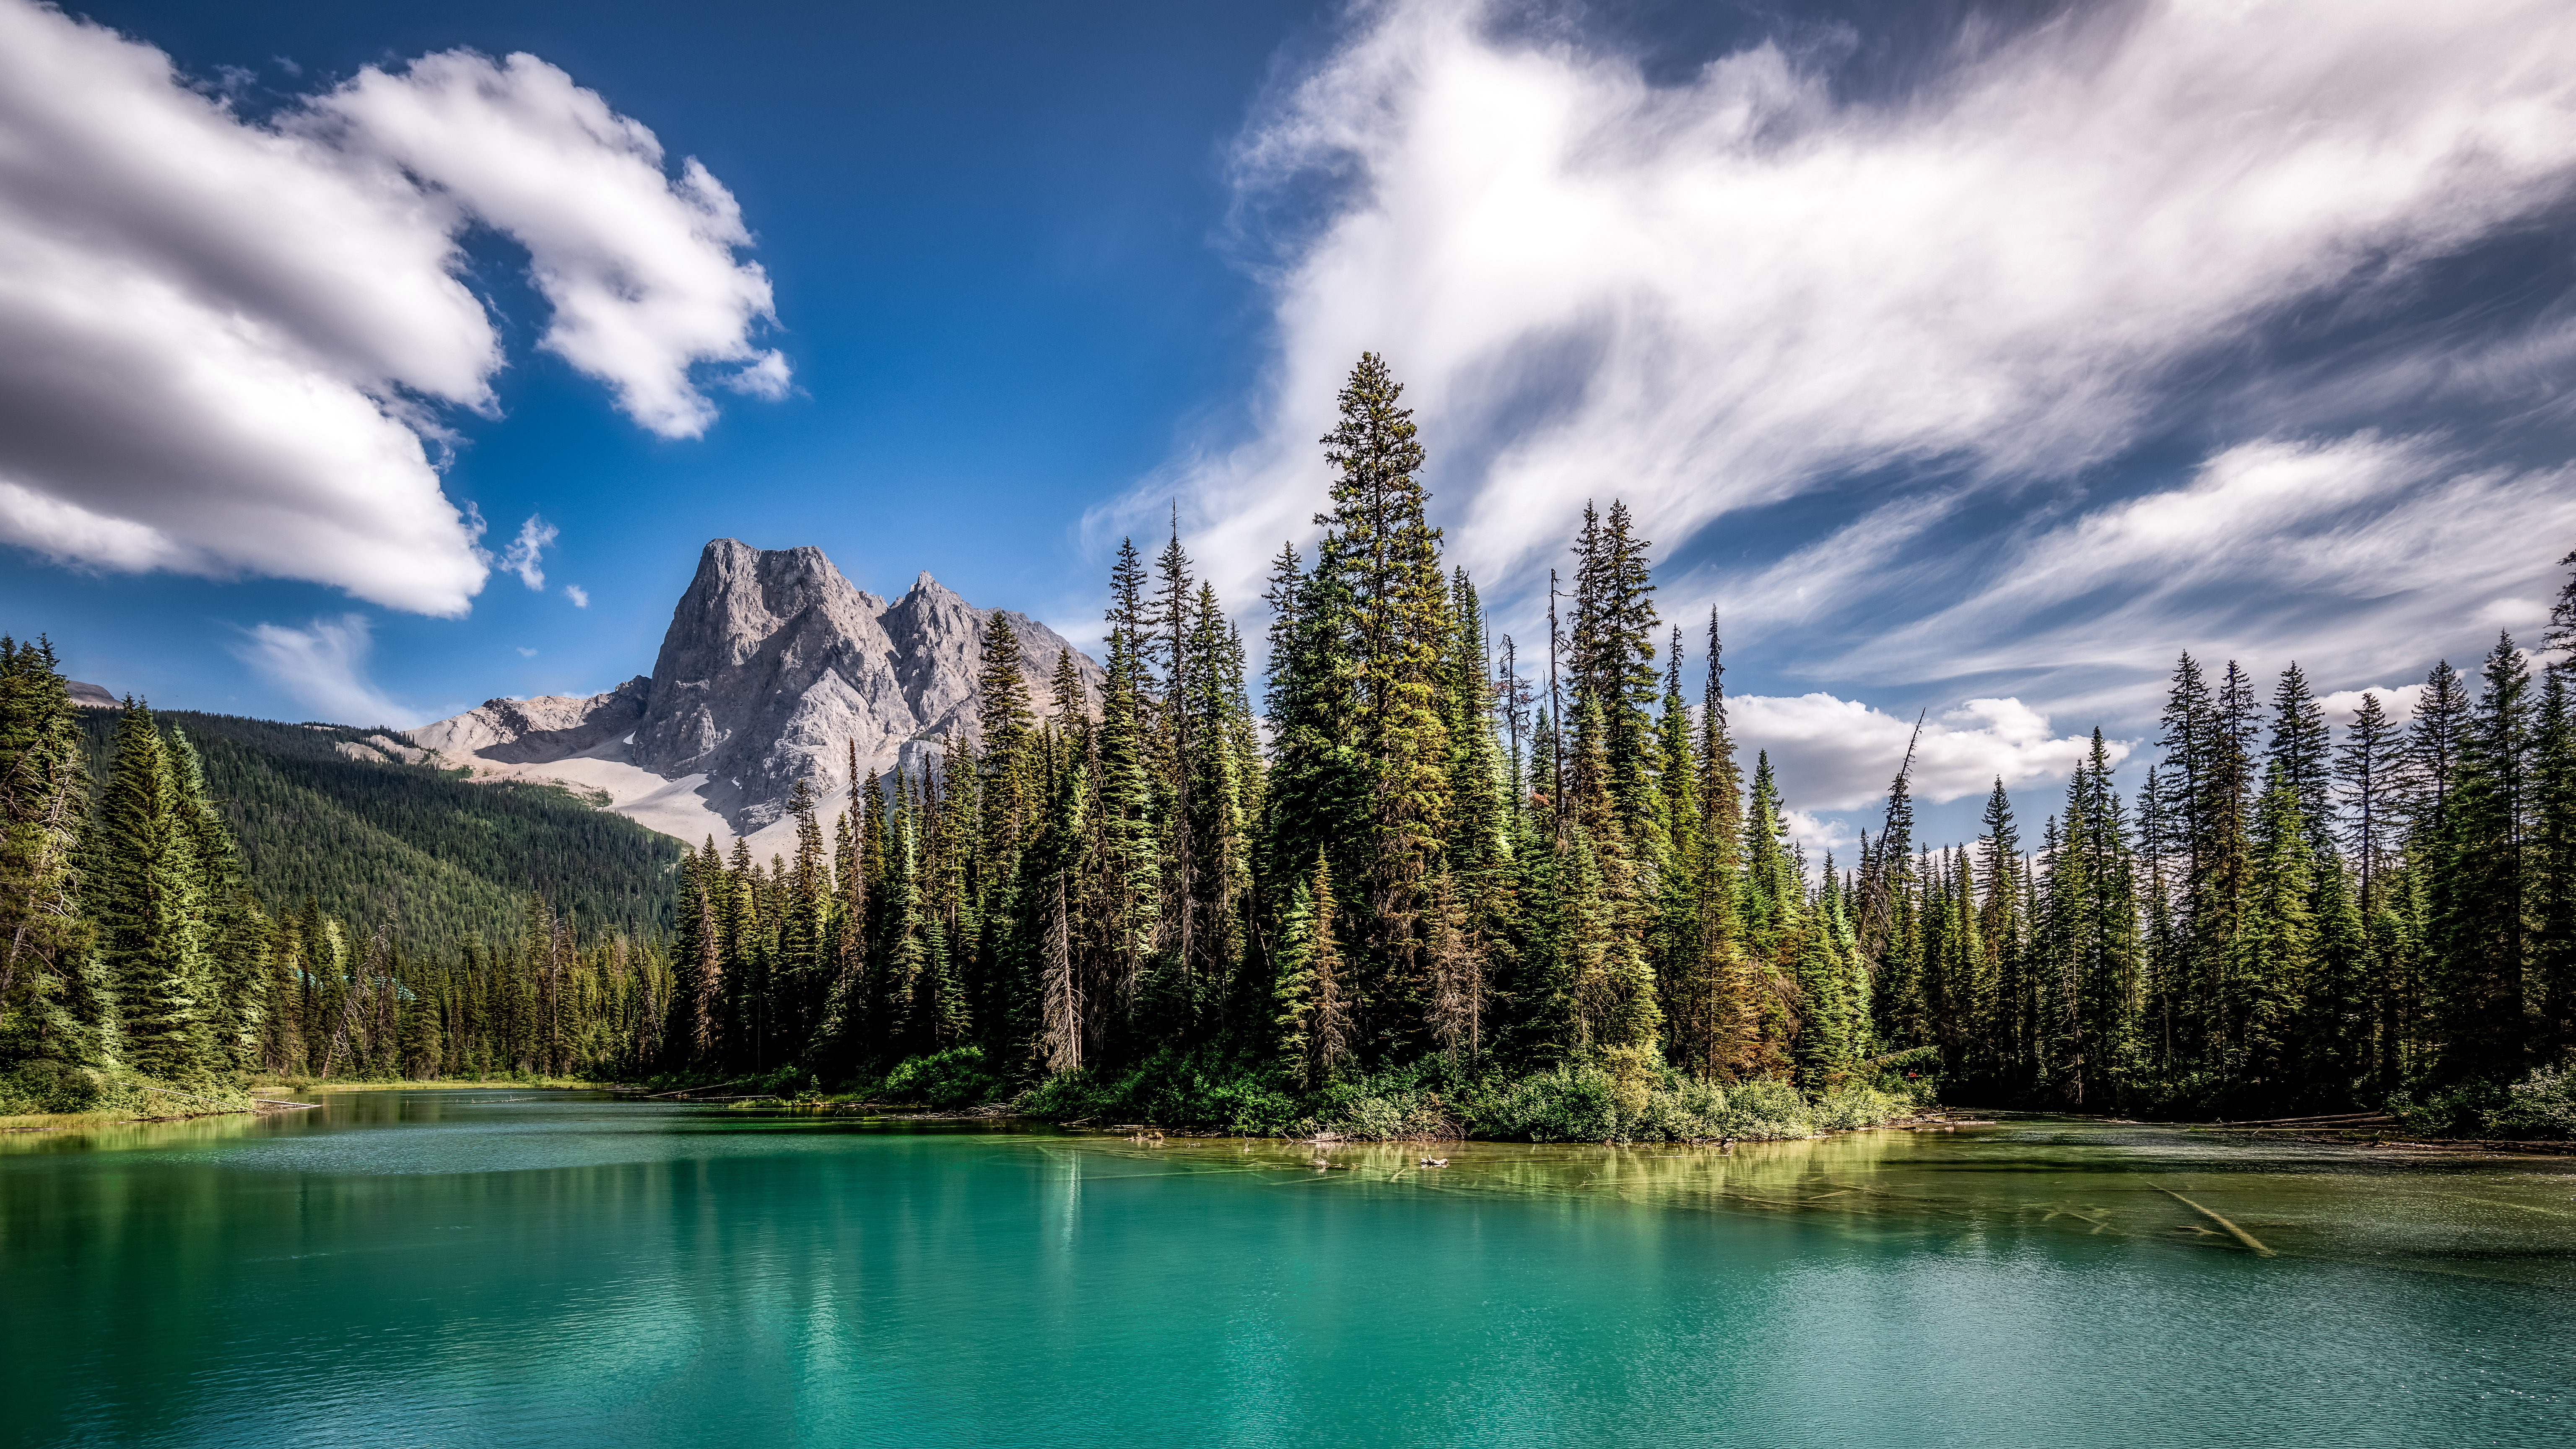 121676 download wallpaper nature, sky, mountains, lake, forest, spruce, fir screensavers and pictures for free